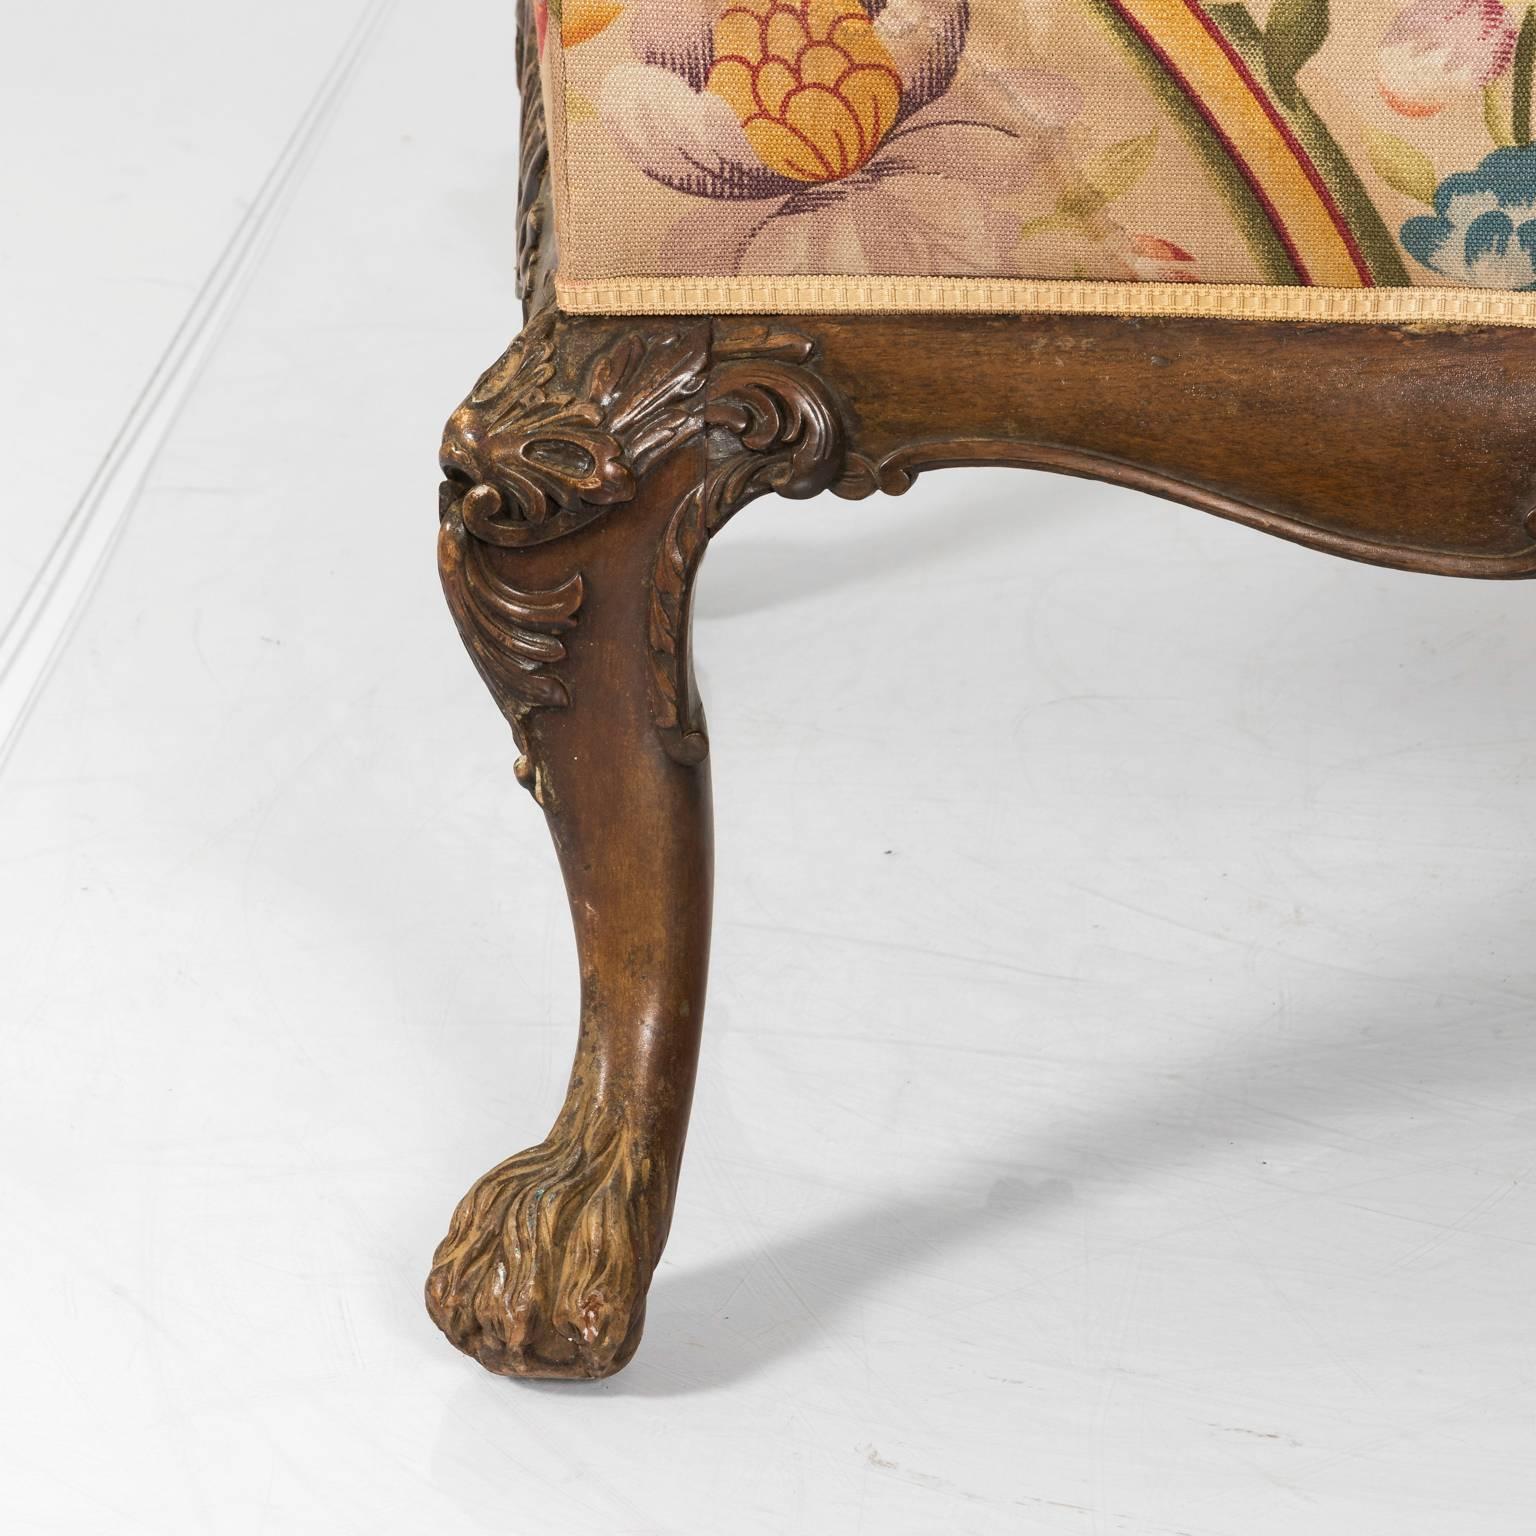 Late 19th century Chippendale style arm chair with curved back armrests and claw feet.
